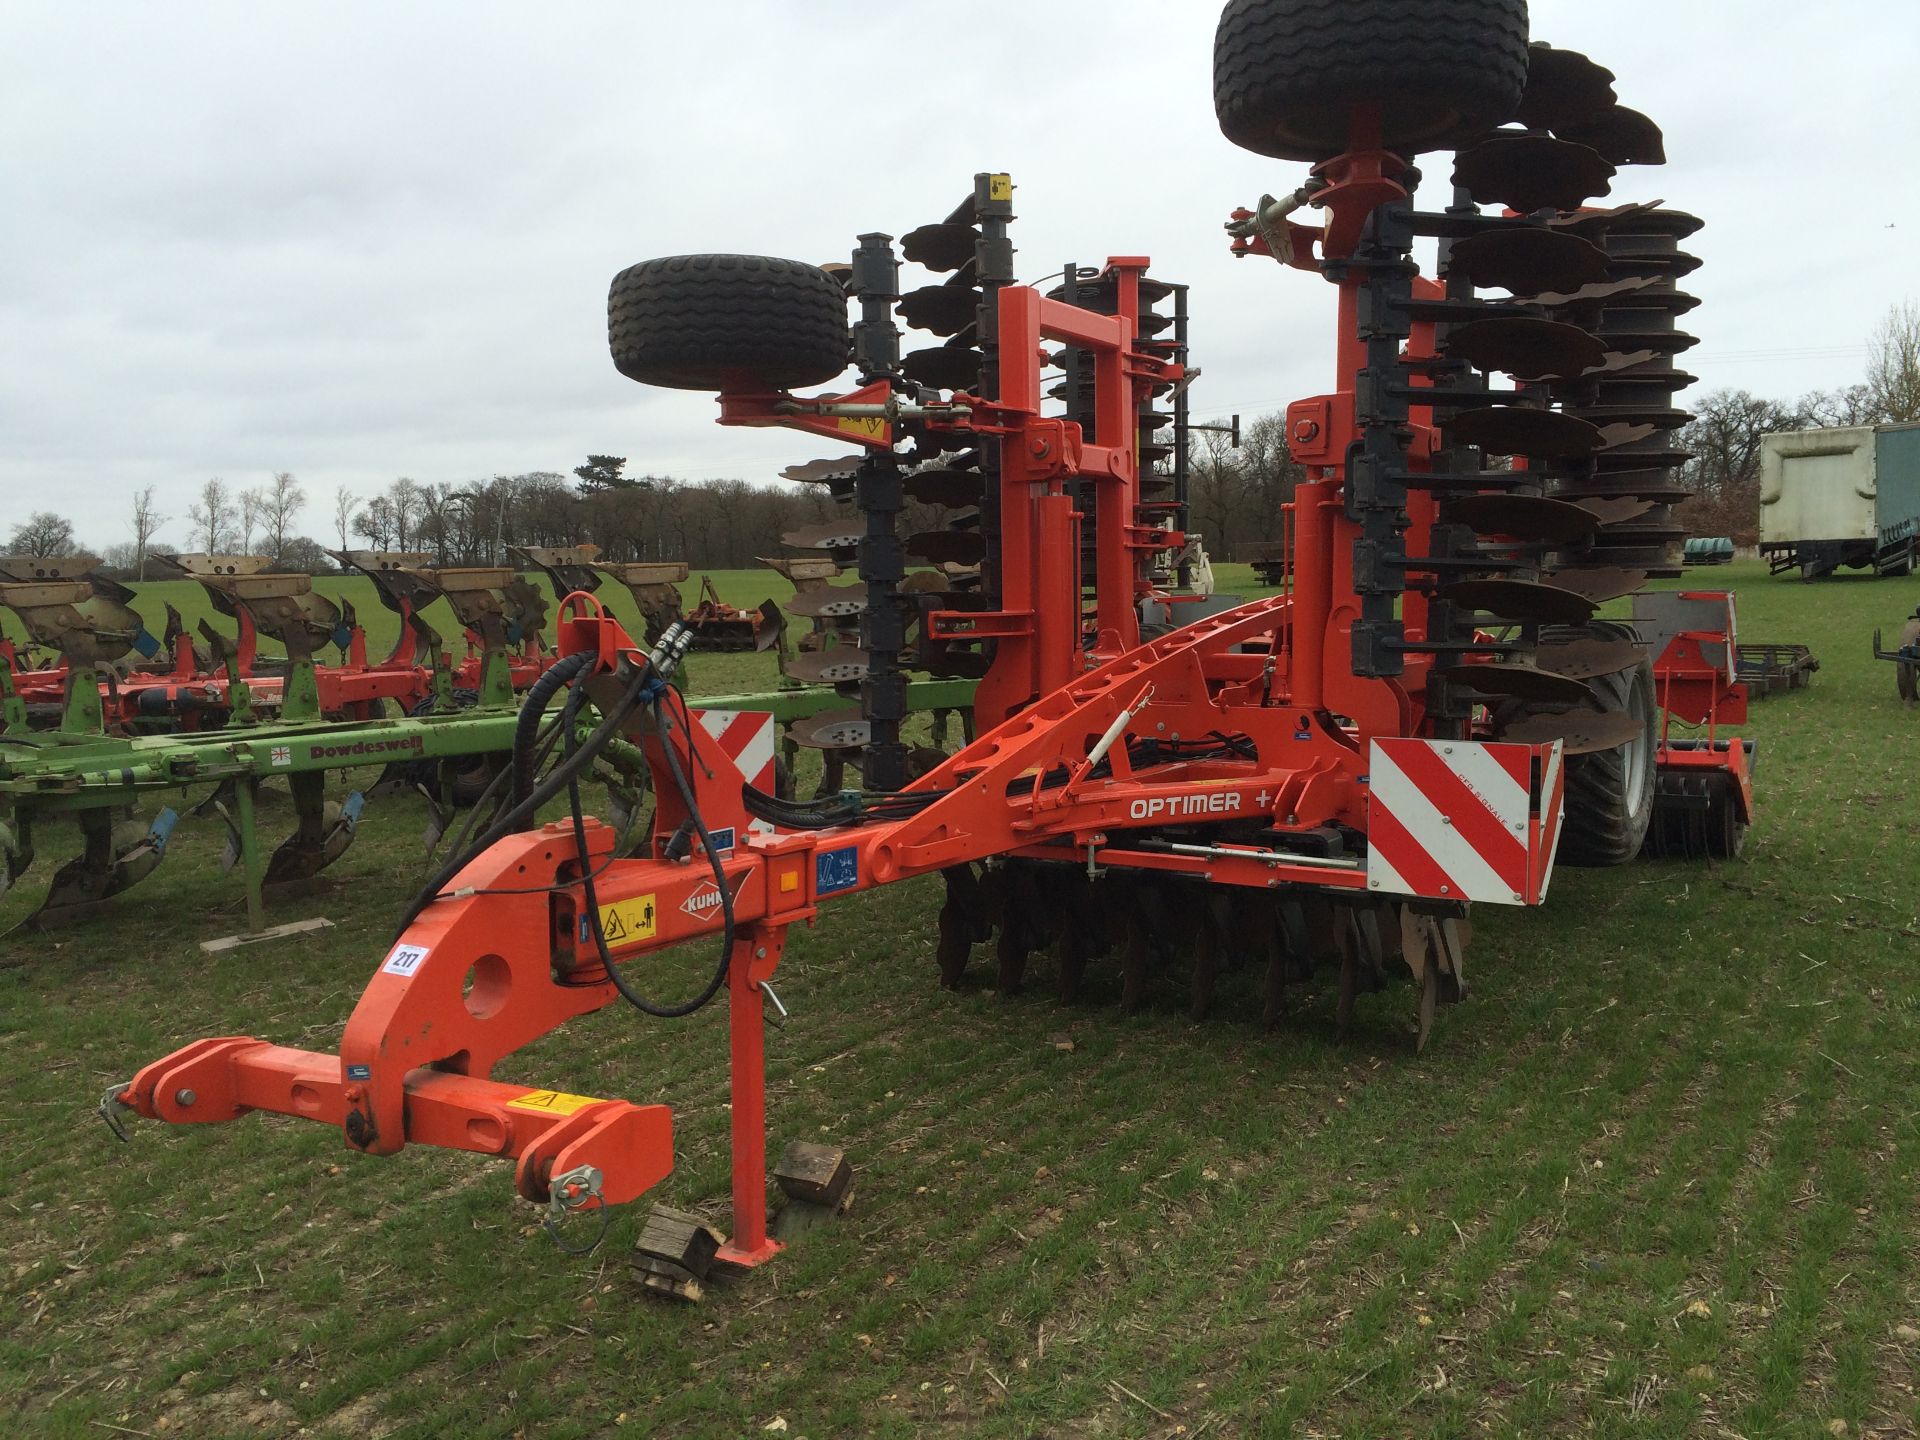 2014 Kuhn Optima 6003 6m disc cultivator with packer roller.